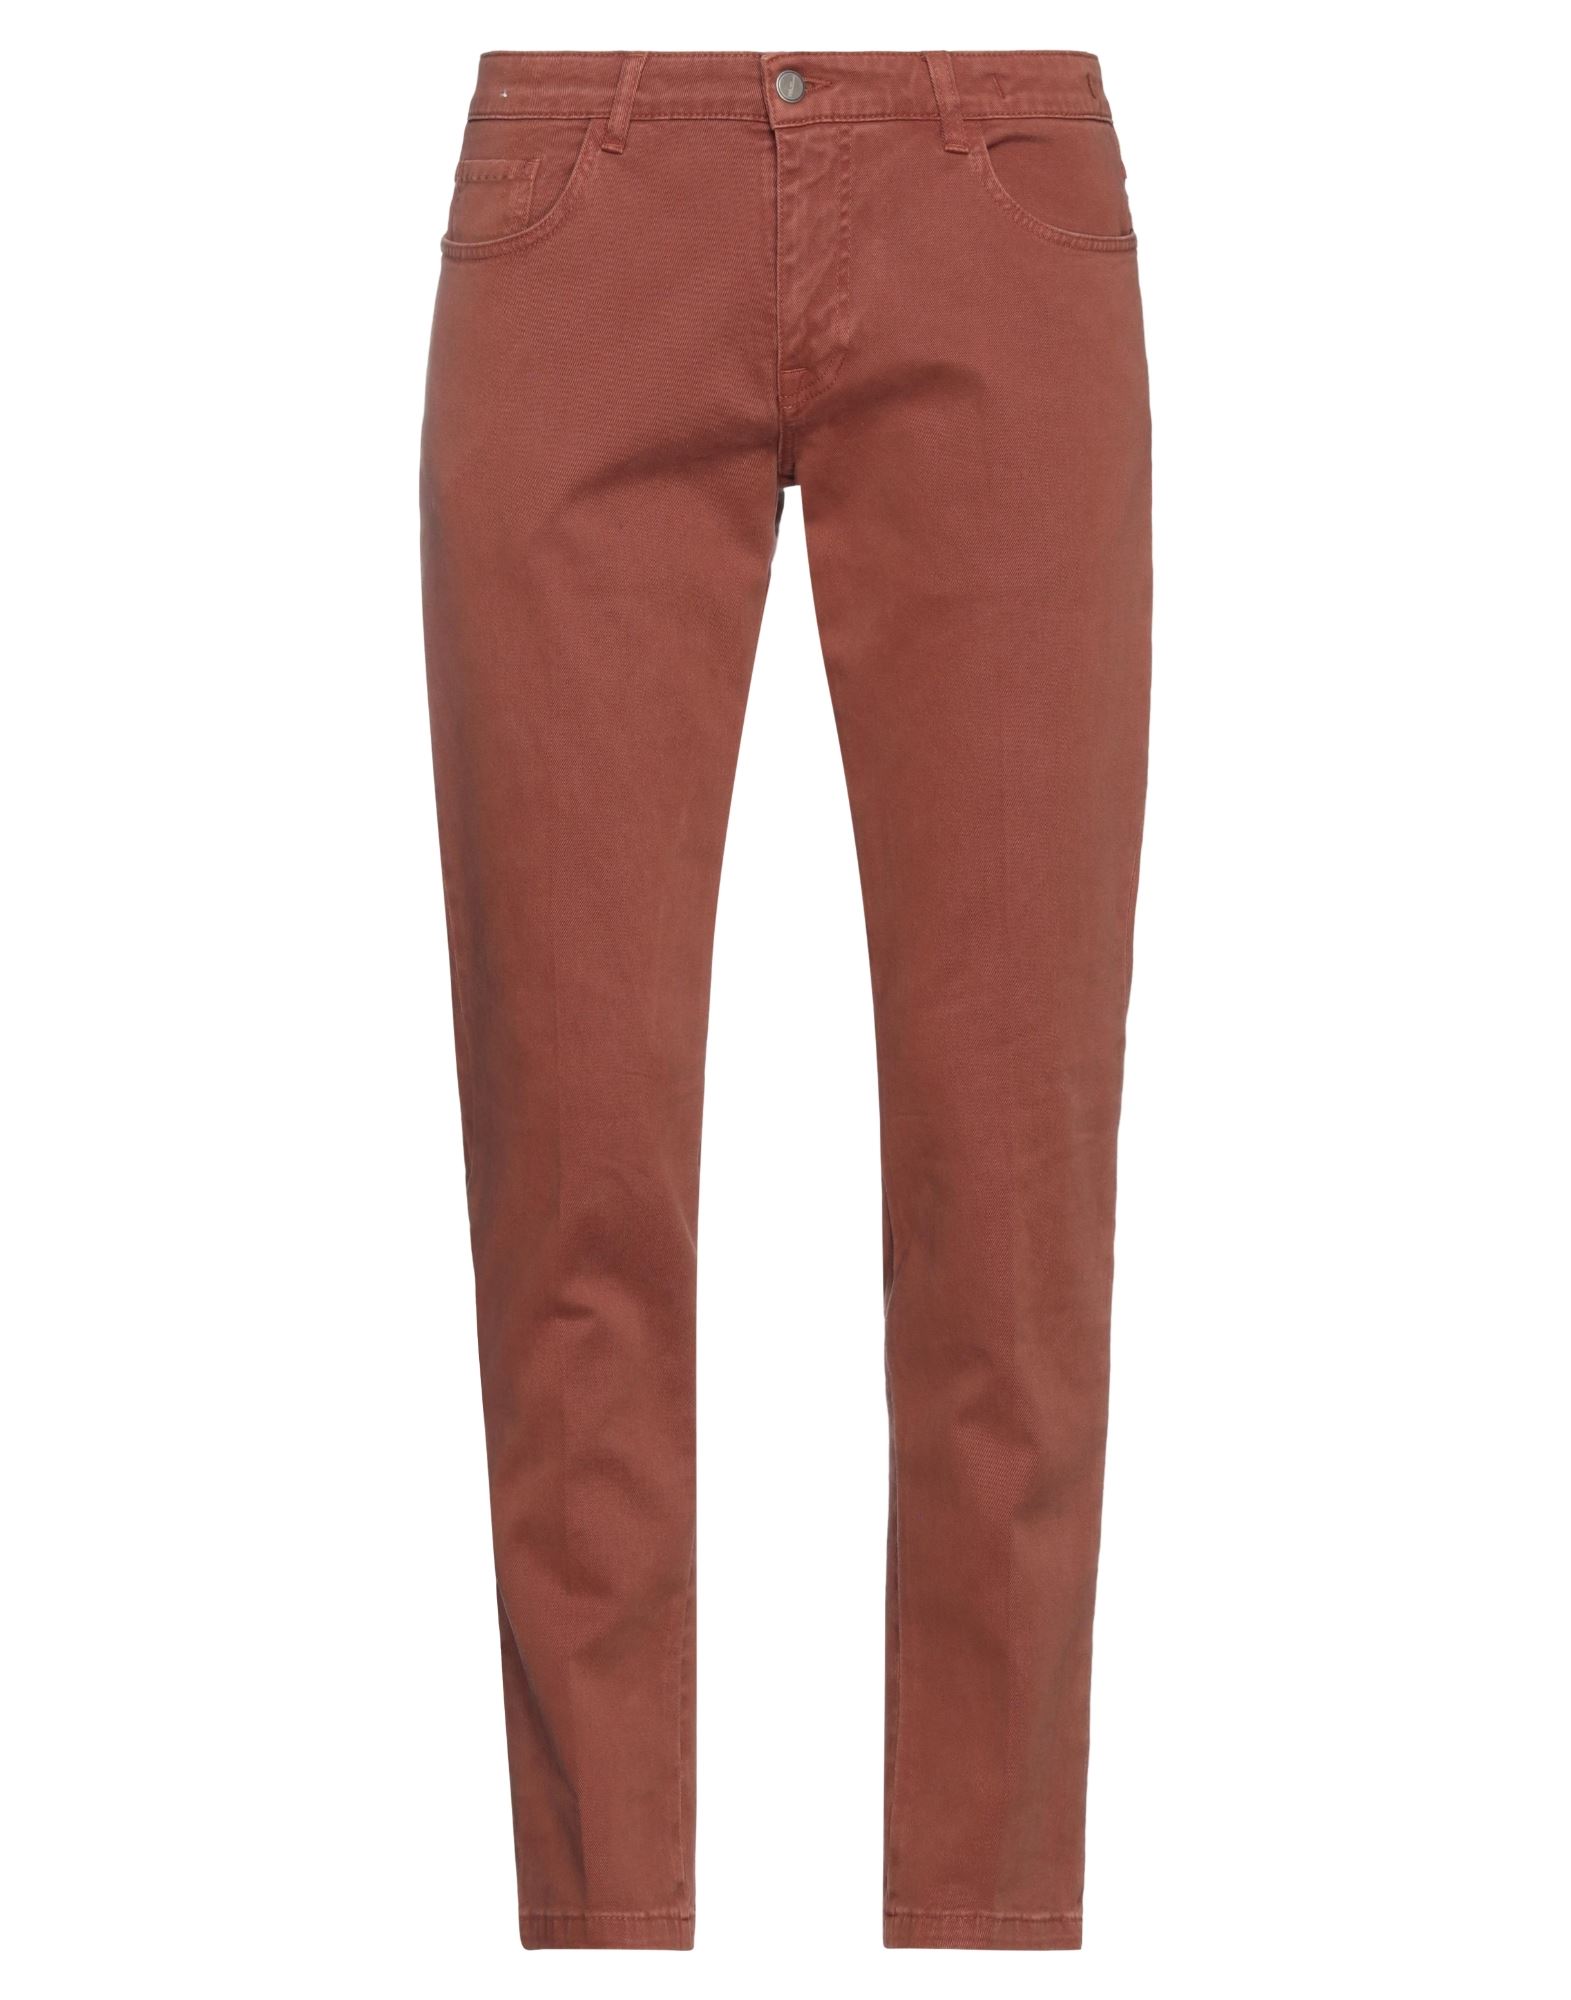 Betwoin Man Pants Rust Size 30 Cotton, Elastane In Red